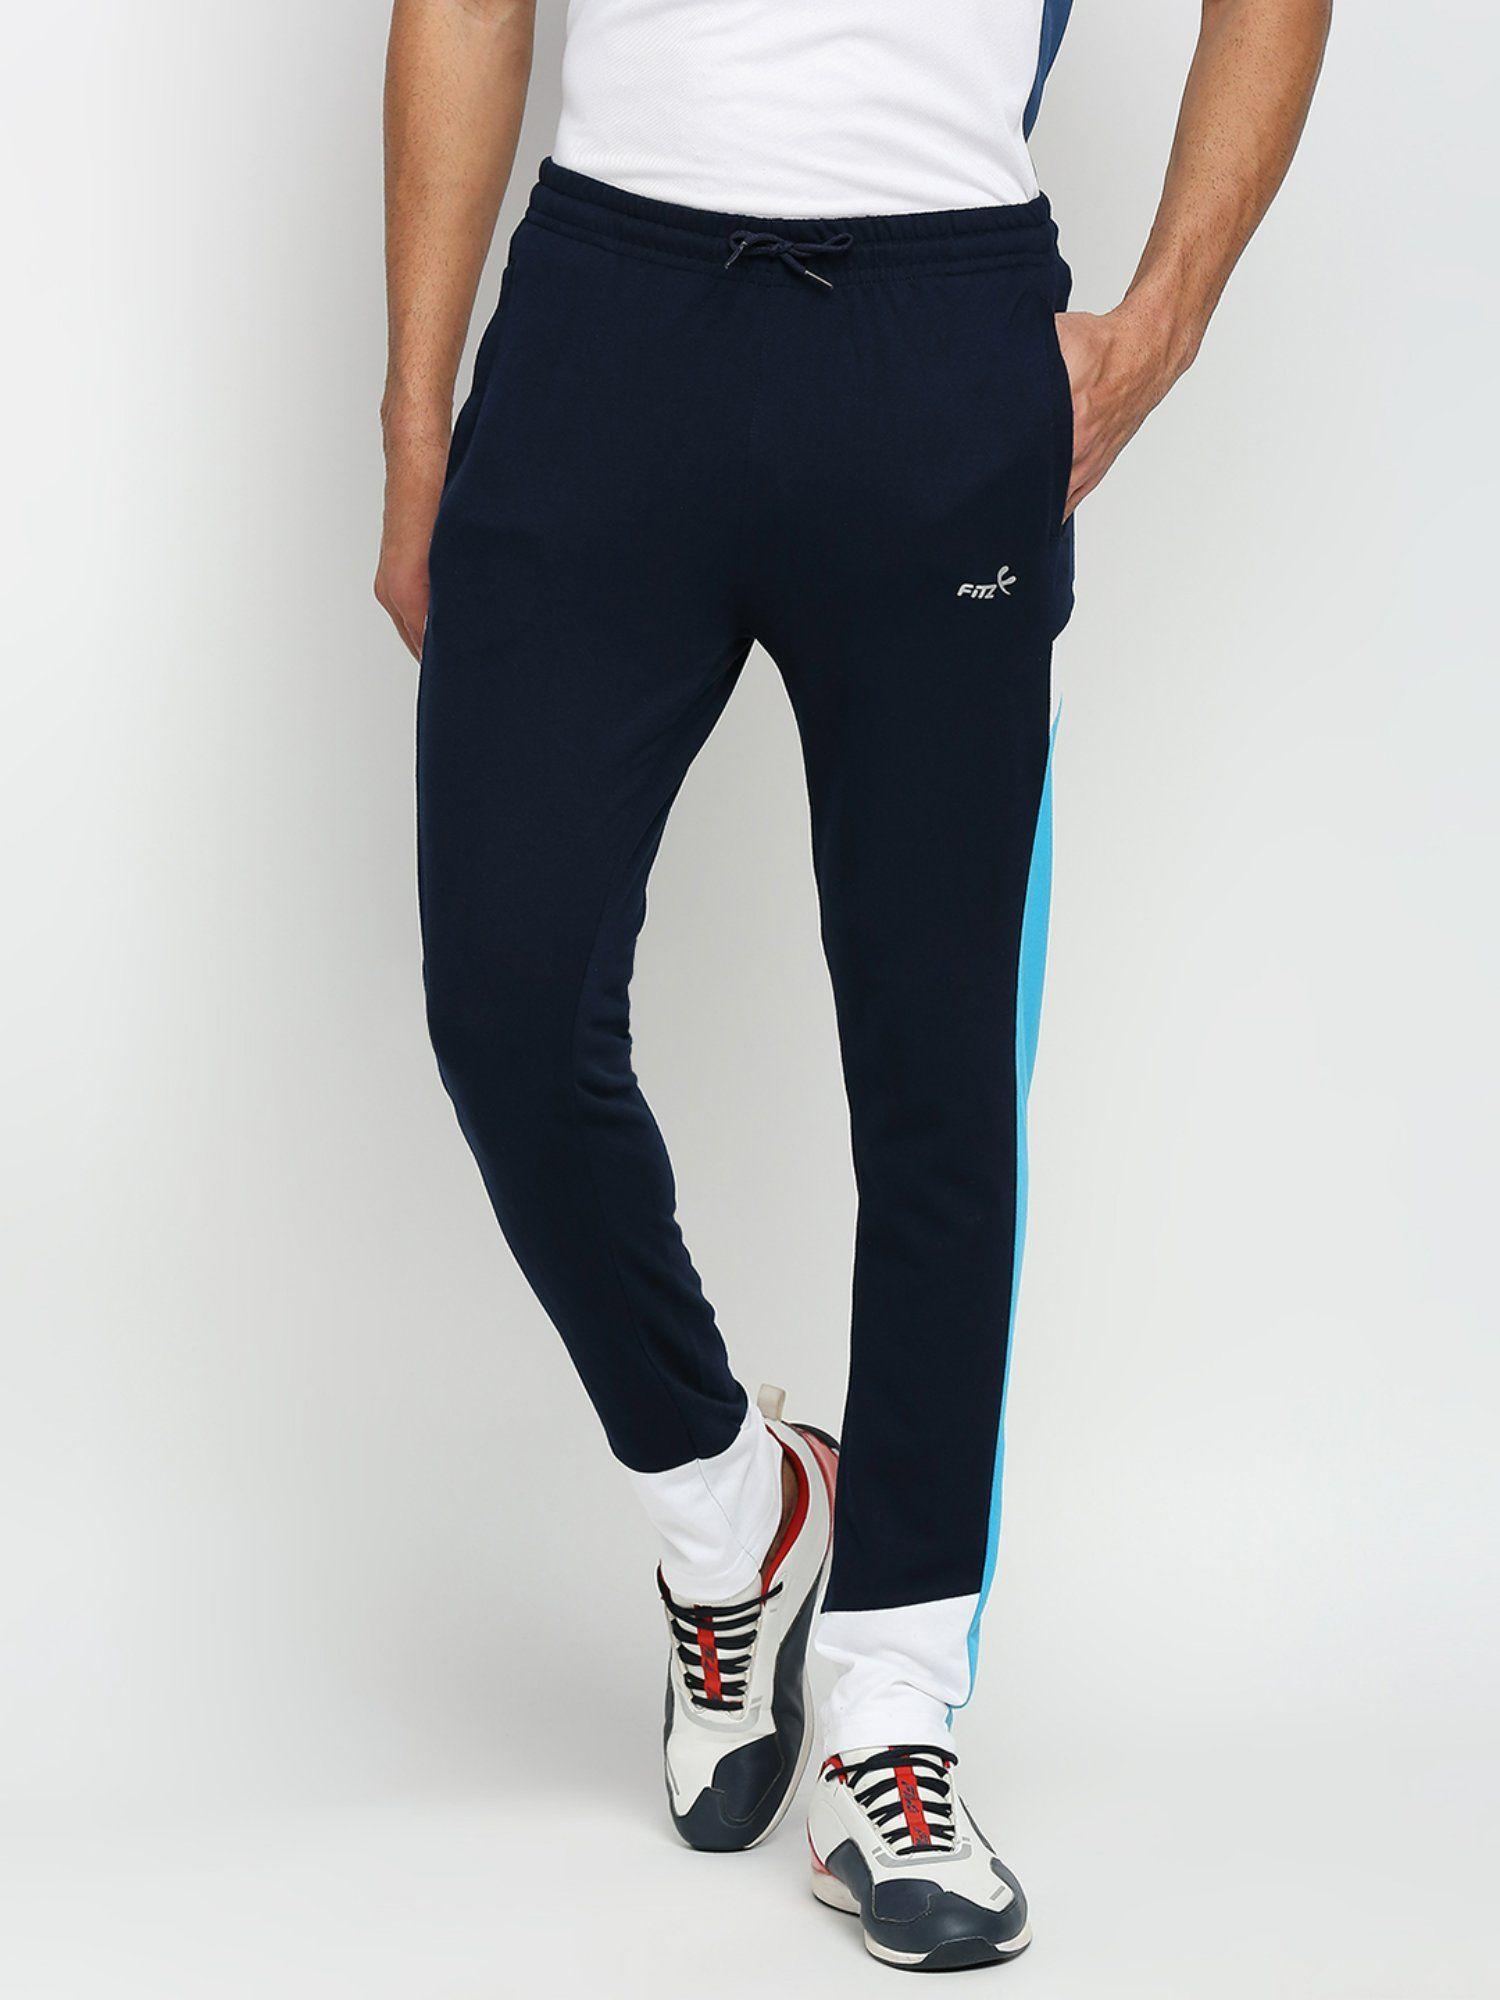 cotton polyester slim fit french terry knit joggers for mens - navy blue